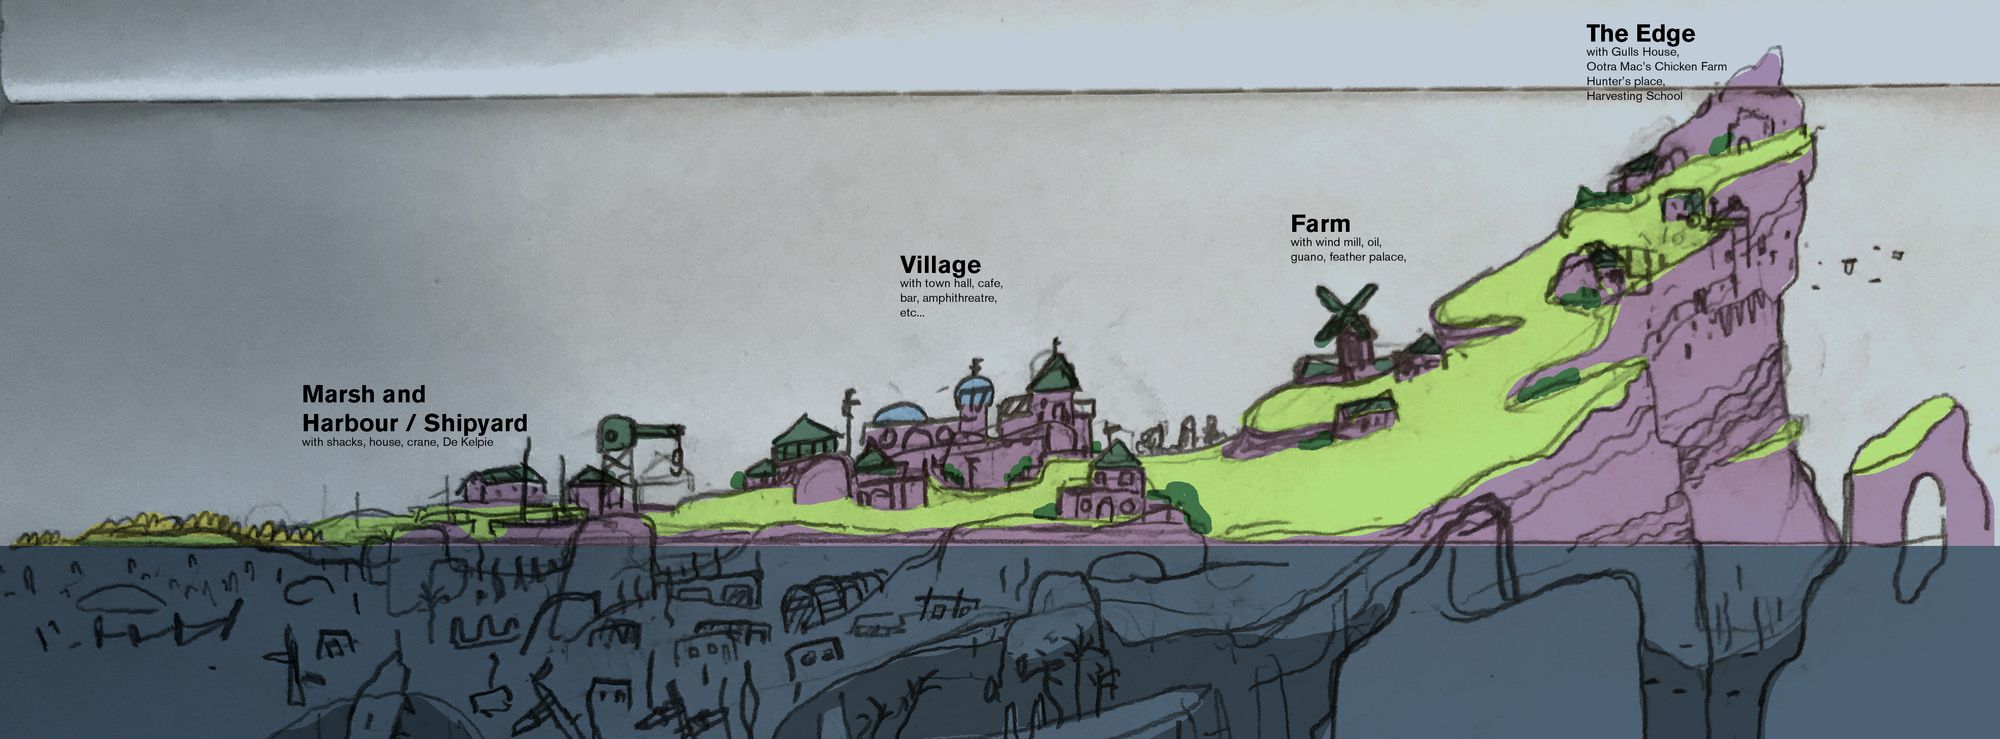 A rough sketch with quick colouring, taken from a notebook and annotated digitally, showing a rough outline for an island which rises from marshes on the left to a large cliff on the right hand side